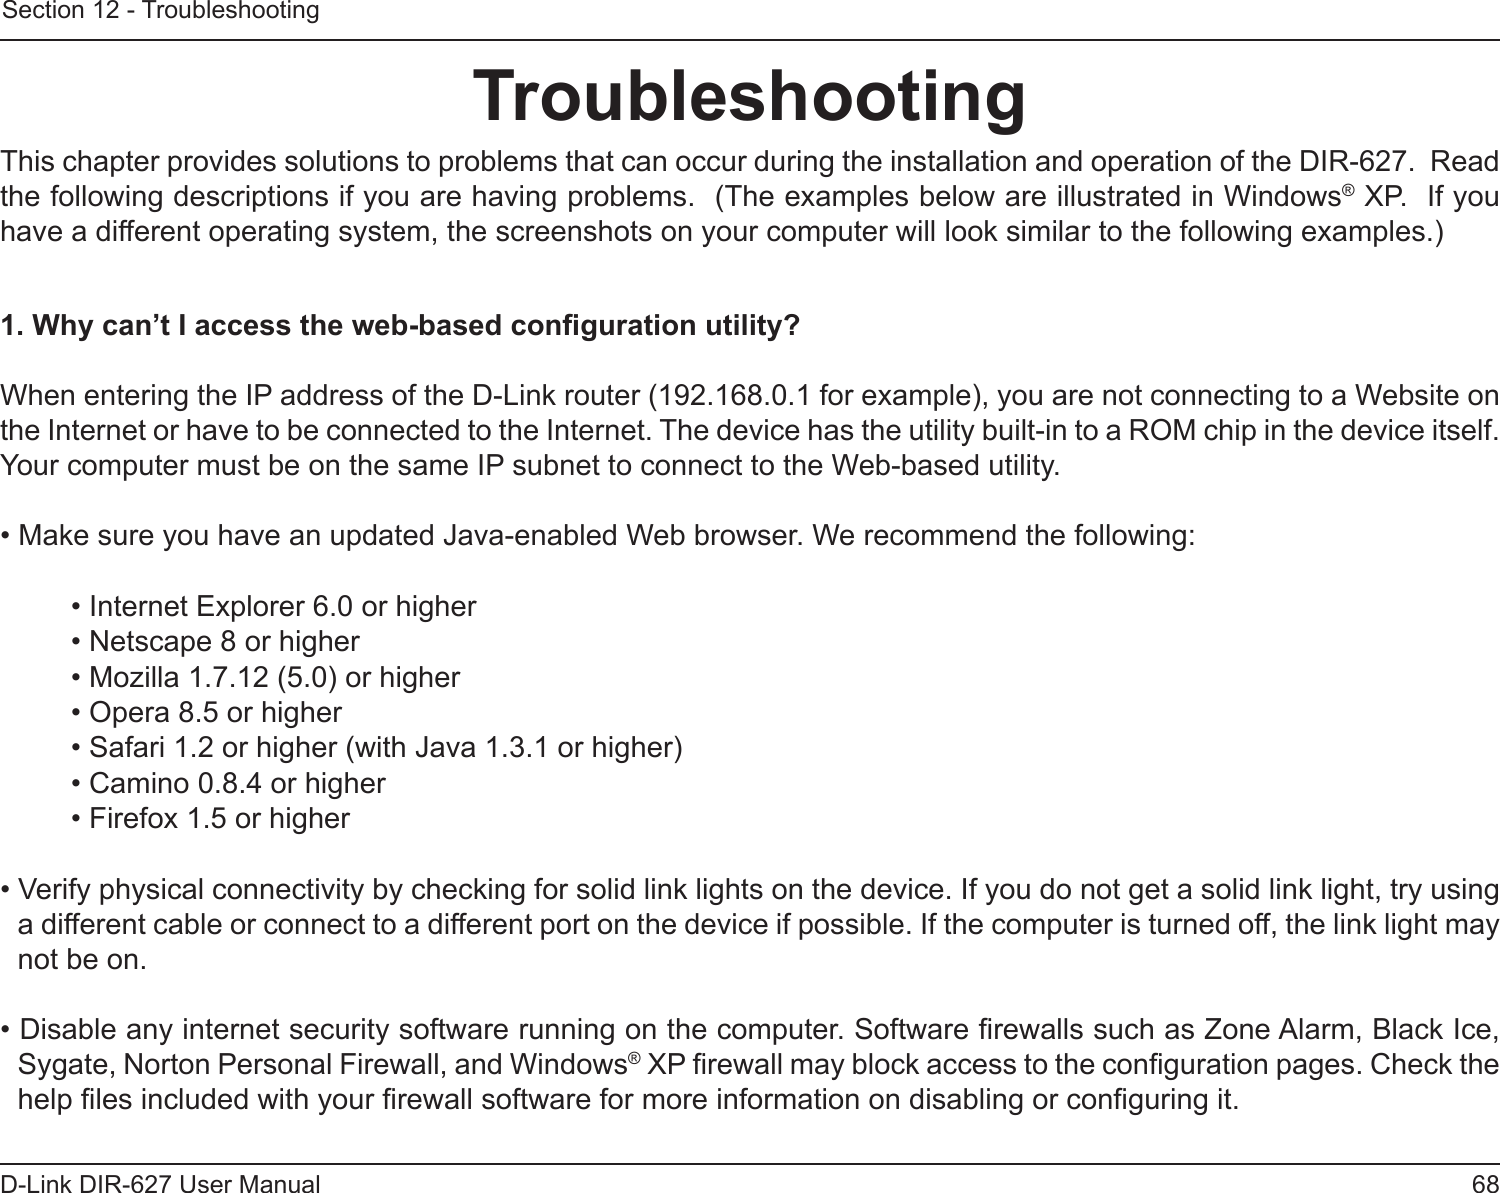 68D-Link DIR-627 User ManualSection 12 - TroubleshootingTroubleshootingThis chapter provides solutions to problems that can occur during the installation and operation of the DIR-627.  Read the following descriptions if you are having problems.  (The examples below are illustrated in Windows® XP.  If you have a different operating system, the screenshots on your computer will look similar to the following examples.)1.Whycan’tIaccesstheweb-basedcongurationutility?When entering the IP address of the D-Link router (192.168.0.1 for example), you are not connecting to a Website on the Internet or have to be connected to the Internet. The device has the utility built-in to a ROM chip in the device itself. Your computer must be on the same IP subnet to connect to the Web-based utility. • Make sure you have an updated Java-enabled Web browser. We recommend the following: • Internet Explorer 6.0 or higher • Netscape 8 or higher • Mozilla 1.7.12 (5.0) or higher • Opera 8.5 or higher • Safari 1.2 or higher (with Java 1.3.1 or higher) • Camino 0.8.4 or higher • Firefox 1.5 or higher • Verify physical connectivity by checking for solid link lights on the device. If you do not get a solid link light, try using a different cable or connect to a different port on the device if possible. If the computer is turned off, the link light may not be on.• Disable any internet security software running on the computer. Software rewalls such as Zone Alarm, Black Ice, Sygate, Norton Personal Firewall, and Windows® XP rewall may block access to the conguration pages. Check the help les included with your rewall software for more information on disabling or conguring it.